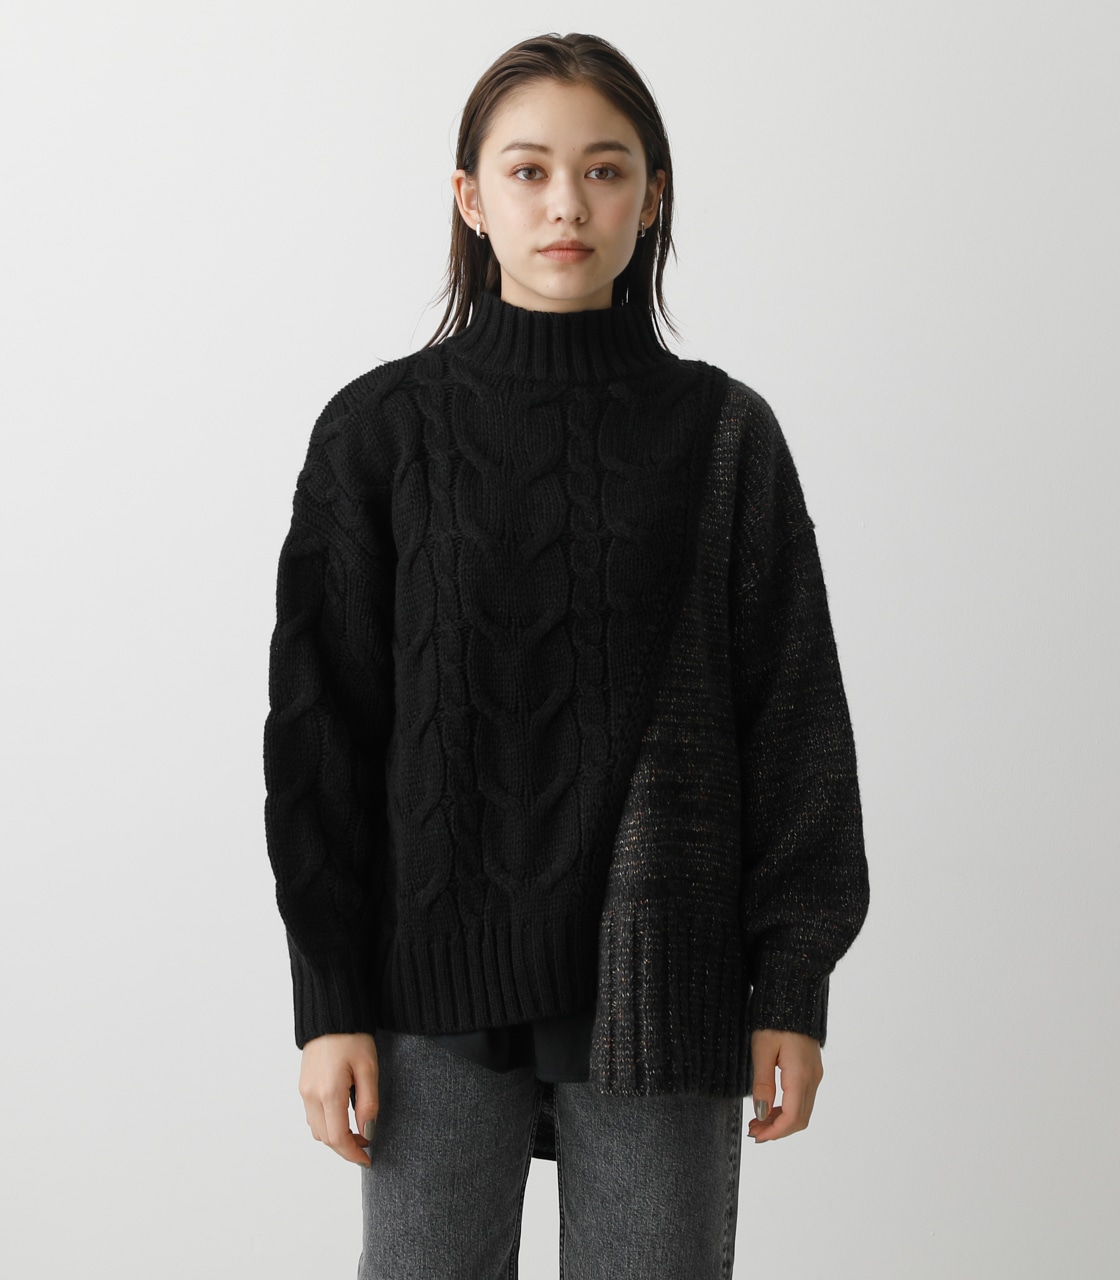 ASYMMETRY CABLE KNIT TOPS/アシンメトリーケーブルニットトップス 詳細画像 BLK 5